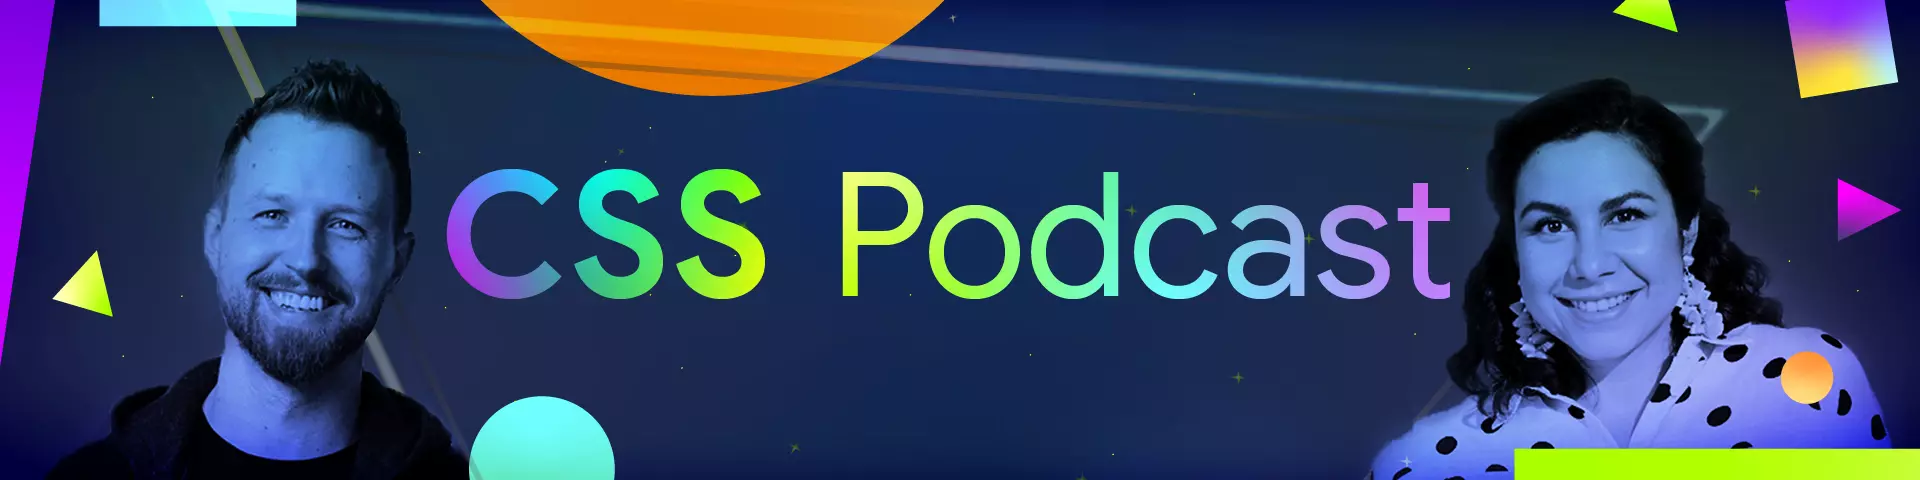 CSS podcast host images